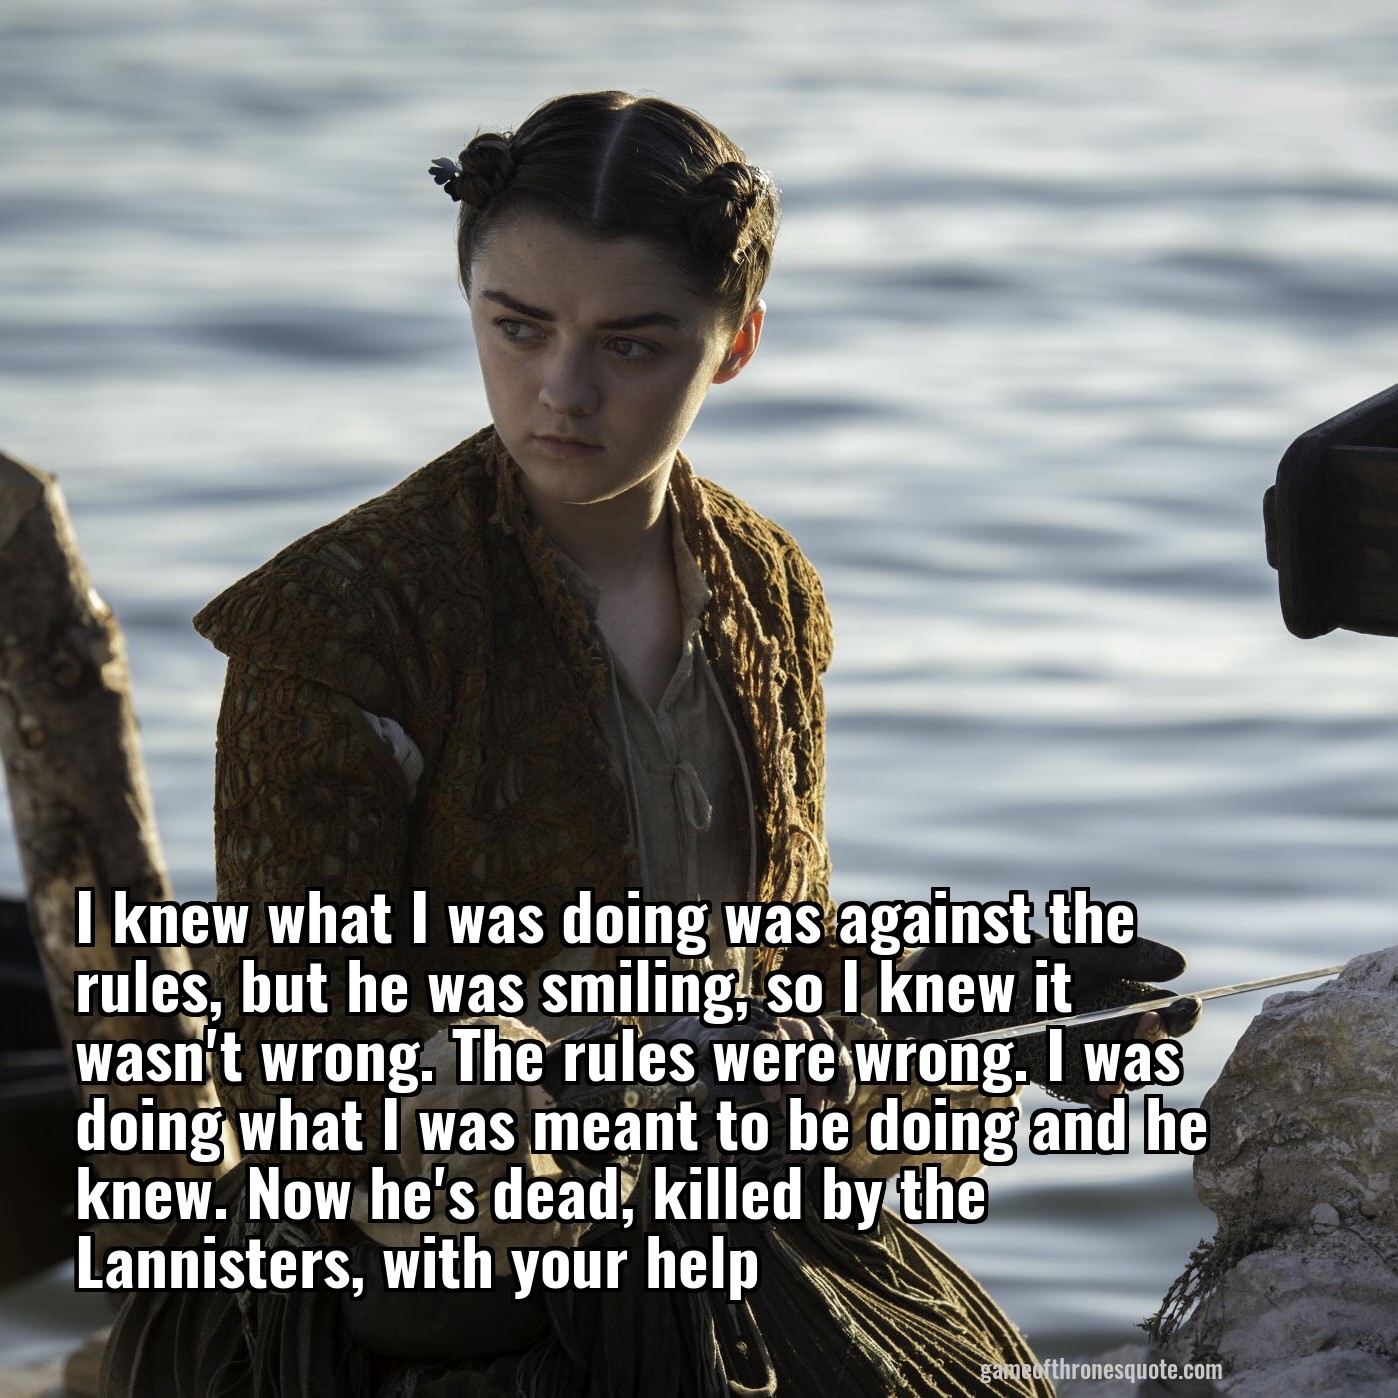 I knew what I was doing was against the rules, but he was smiling, so I knew it wasn't wrong. The rules were wrong. I was doing what I was meant to be doing and he knew. Now he's dead, killed by the Lannisters, with your help